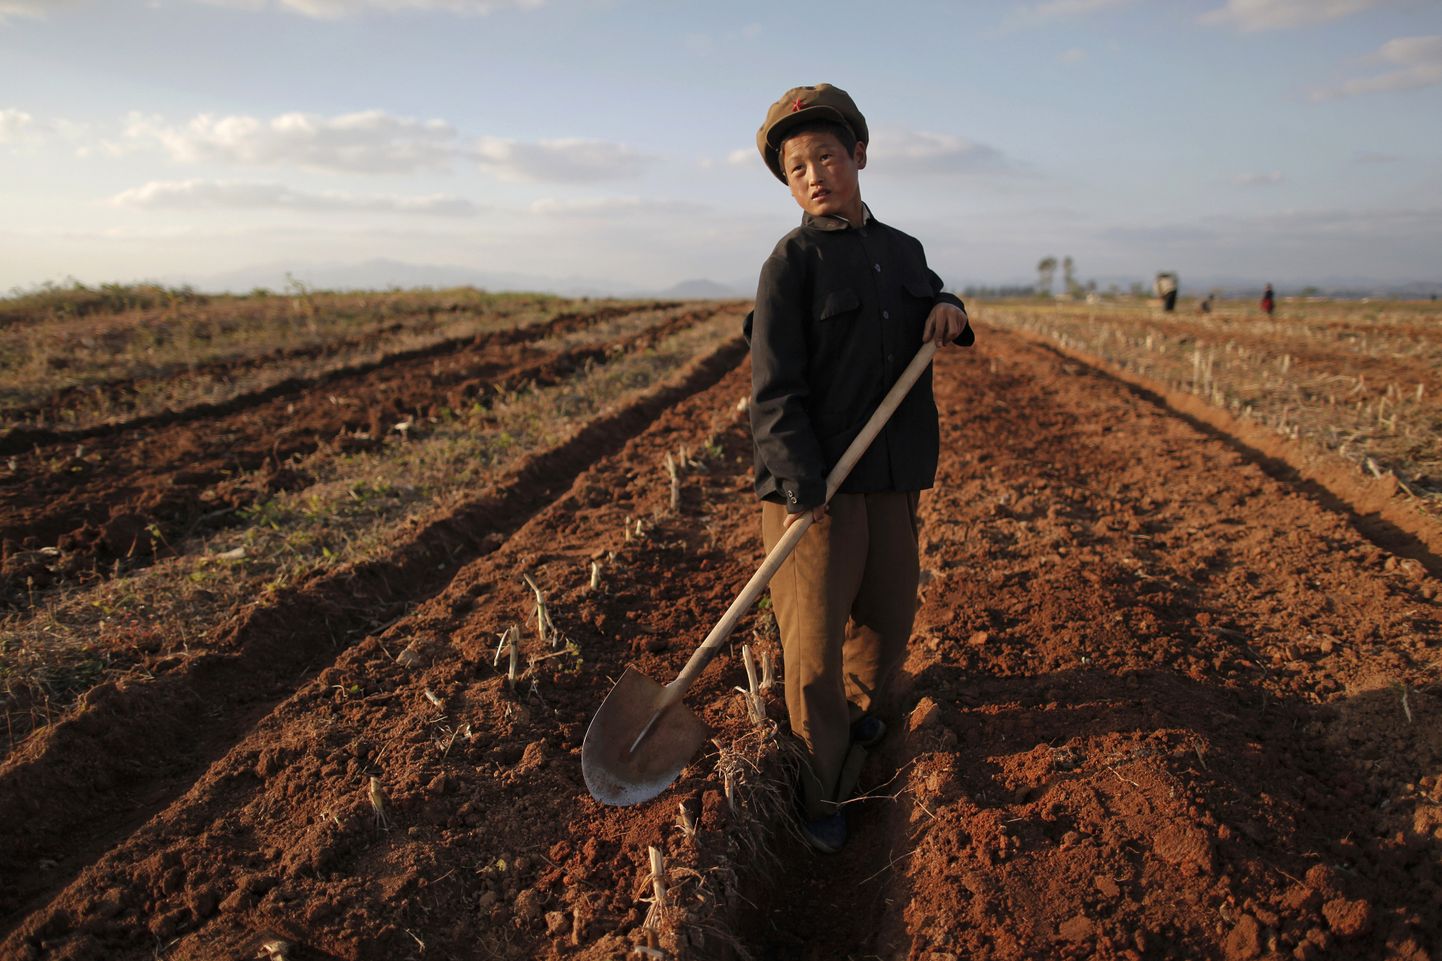 EDITORS NOTE: PICTURES TAKEN ON A GOVERNMENT CONTROLLED TOUR FOR REUTERS ALERTNET 
A North Korean boy works in a field of a collective farm in the area damaged by summer floods and typhoons in South Hwanghae province, in this September 30, 2011 file photo.  North Korea plans to allow farmers to keep more of their produce in an attempt to boost agricultural output, a source with close ties to Pyongyang and Beijing said, in a move that could boost supplies, help cap rising food prices and ease malnutrition. The move to liberalise agriculture under new leader Kim Jong-un, who took office in December 2011 after the death of his father, would reverse a crackdown on private production that started in 2005. It comes amid talk that the youngest Kim to rule the impoverished North is considering reforms to boost the economy. REUTERS/Damir Sagolj/Files   (NORTH KOREA - Tags: AGRICULTURE HEALTH SOCIETY POVERTY BUSINESS)